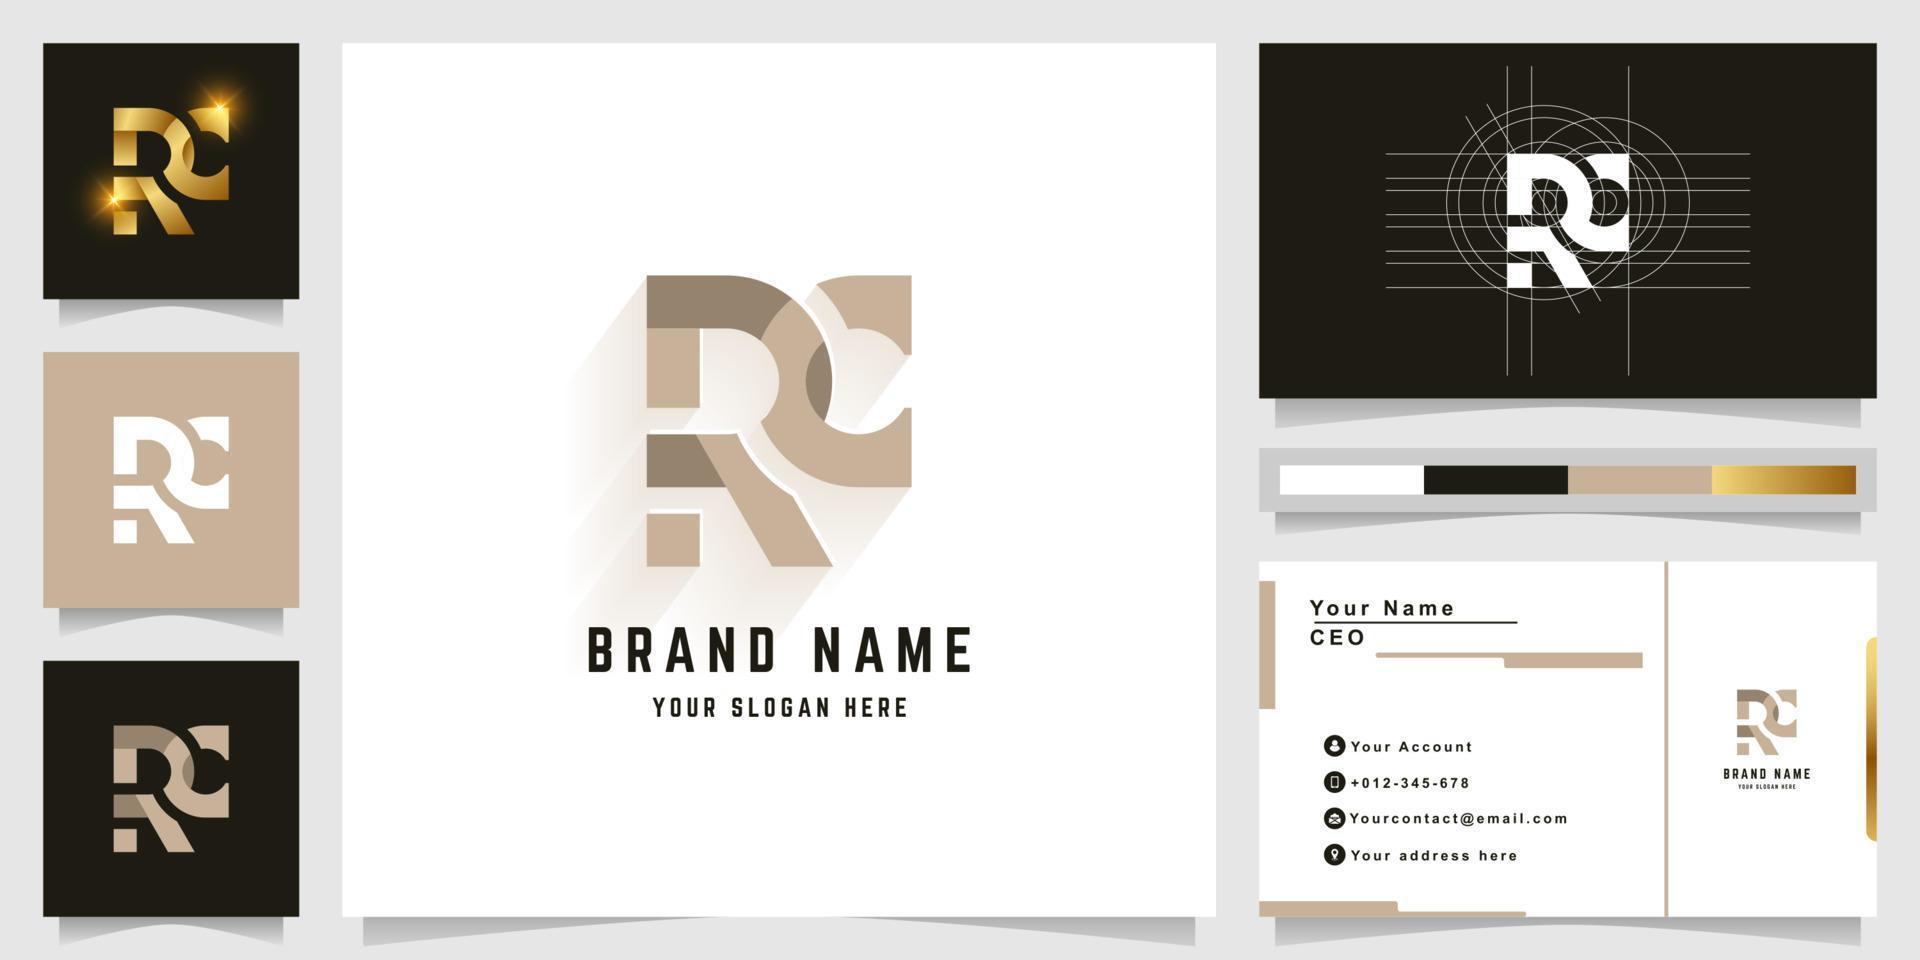 Letter RC or RNC monogram logo with business card design vector